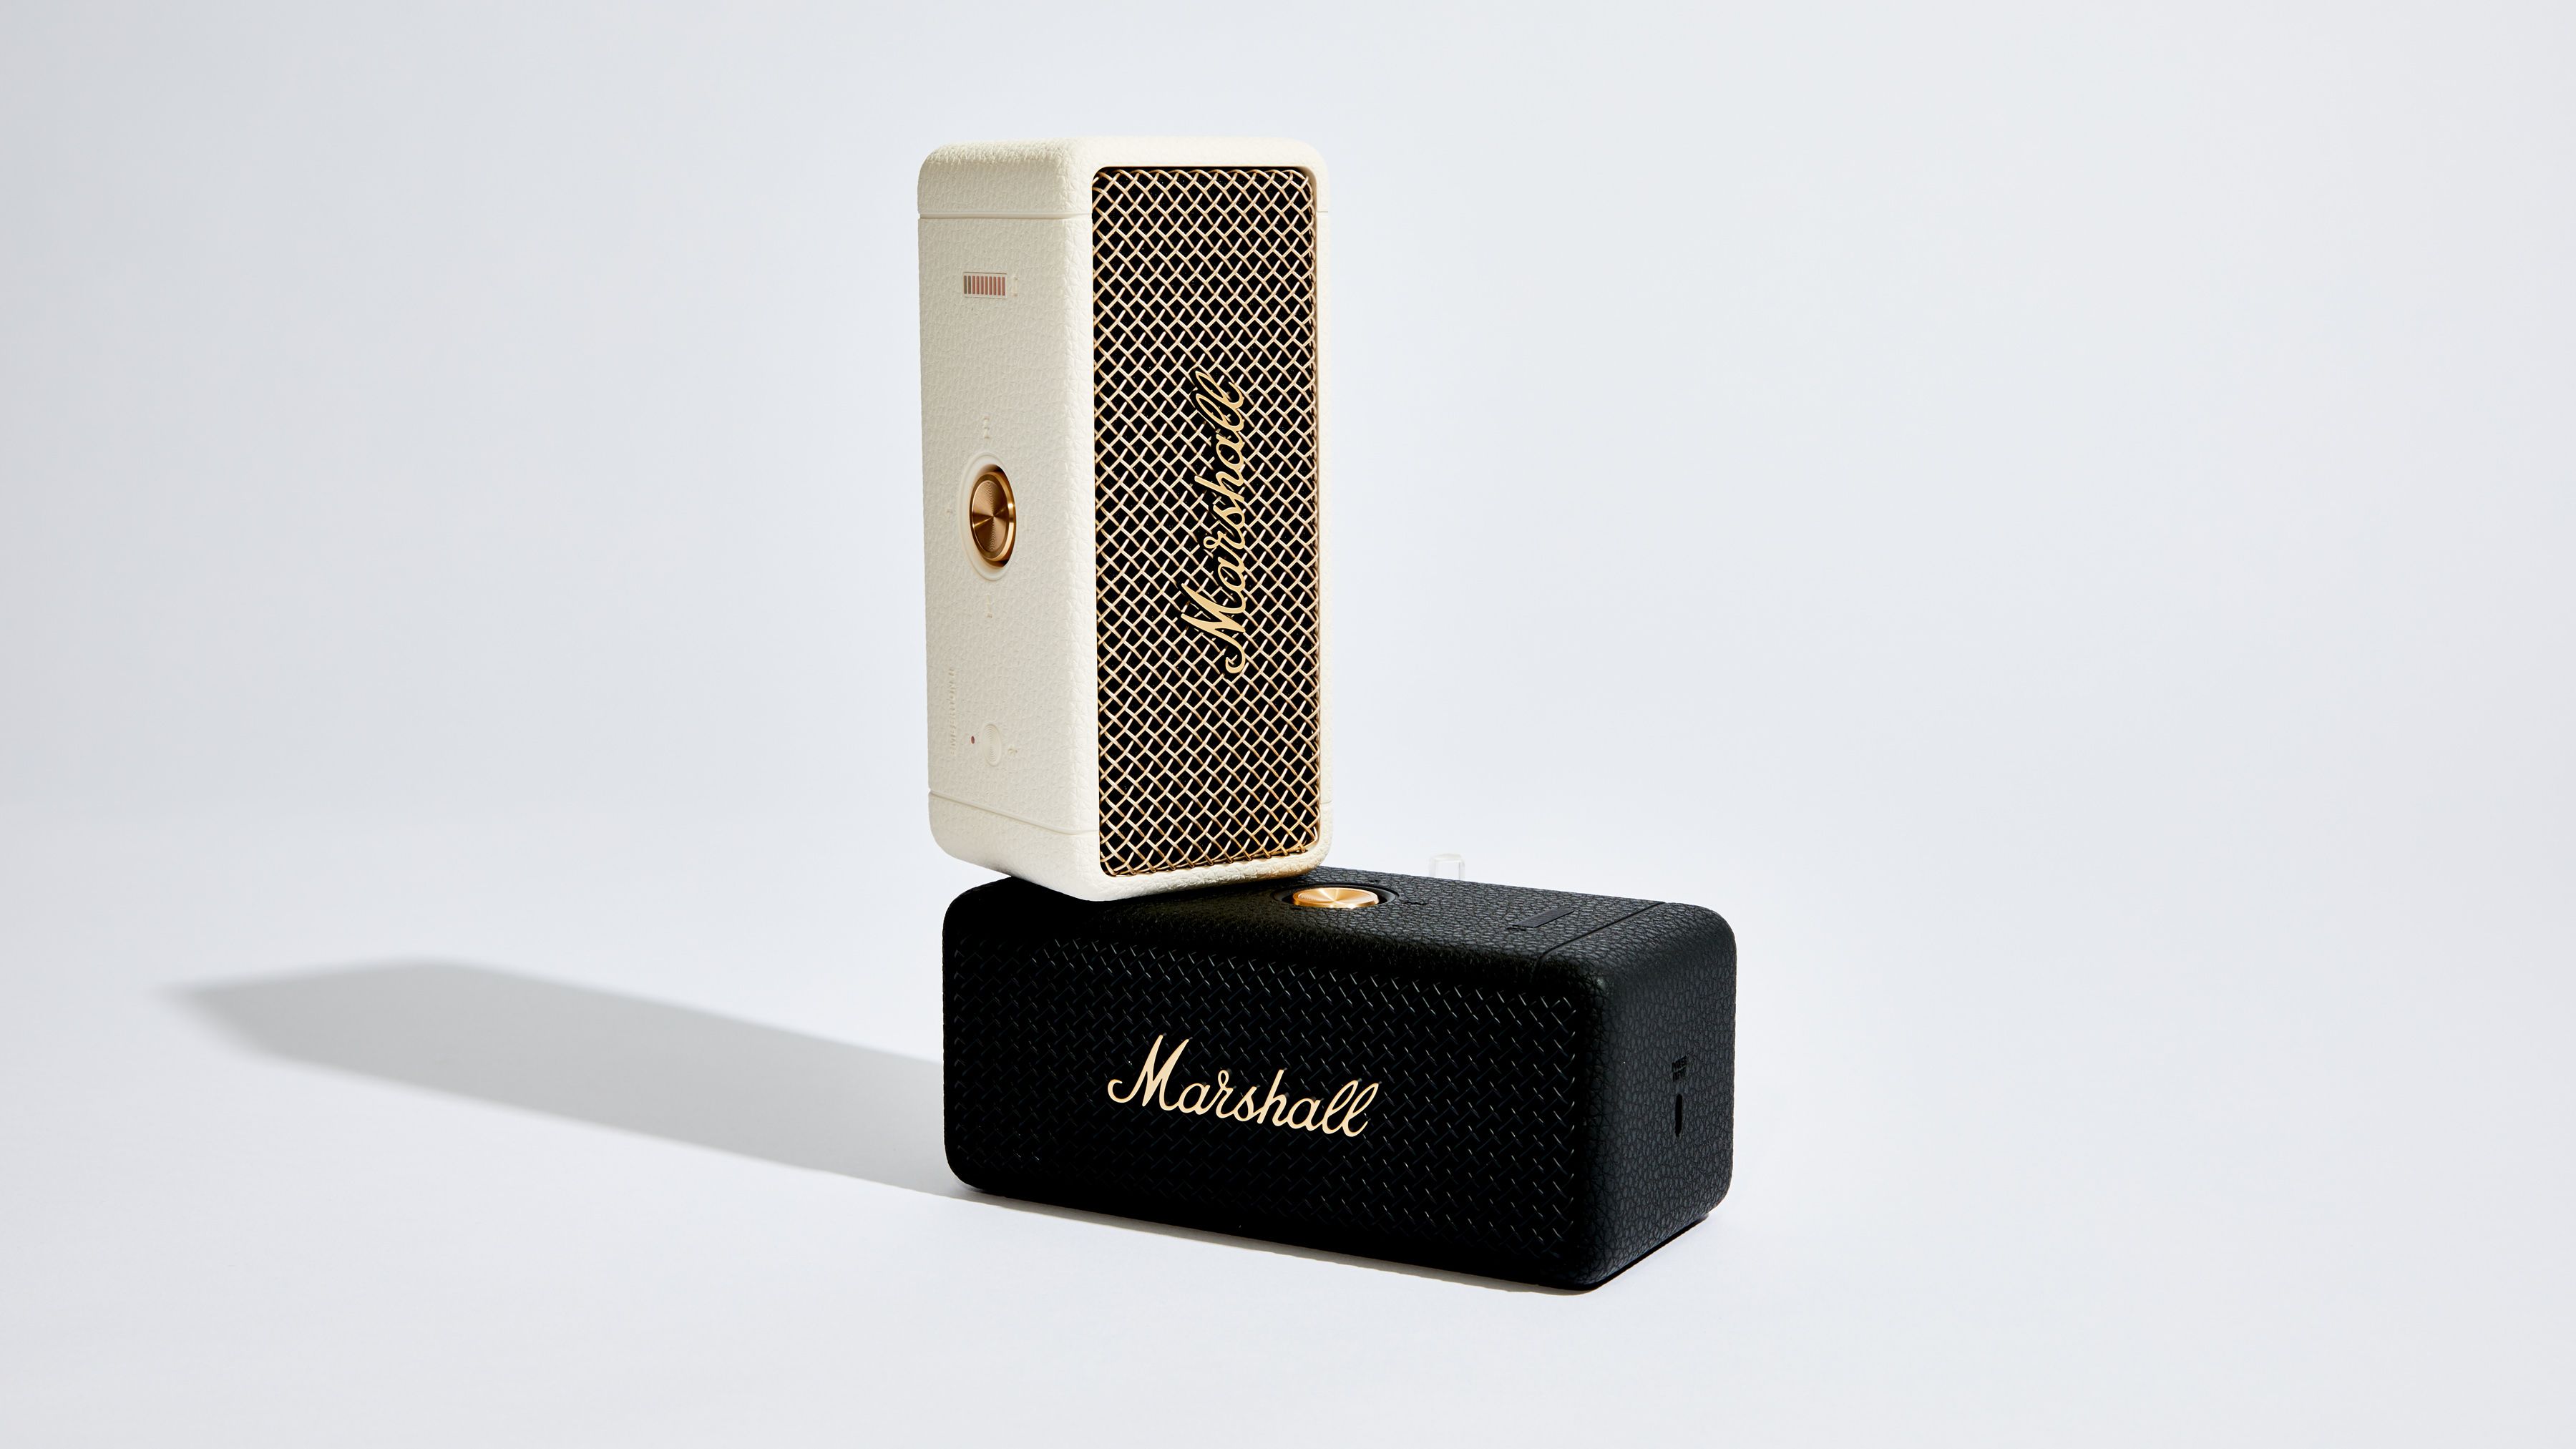 Marshall Emberton review: cool-looking speaker packs a surprising punch